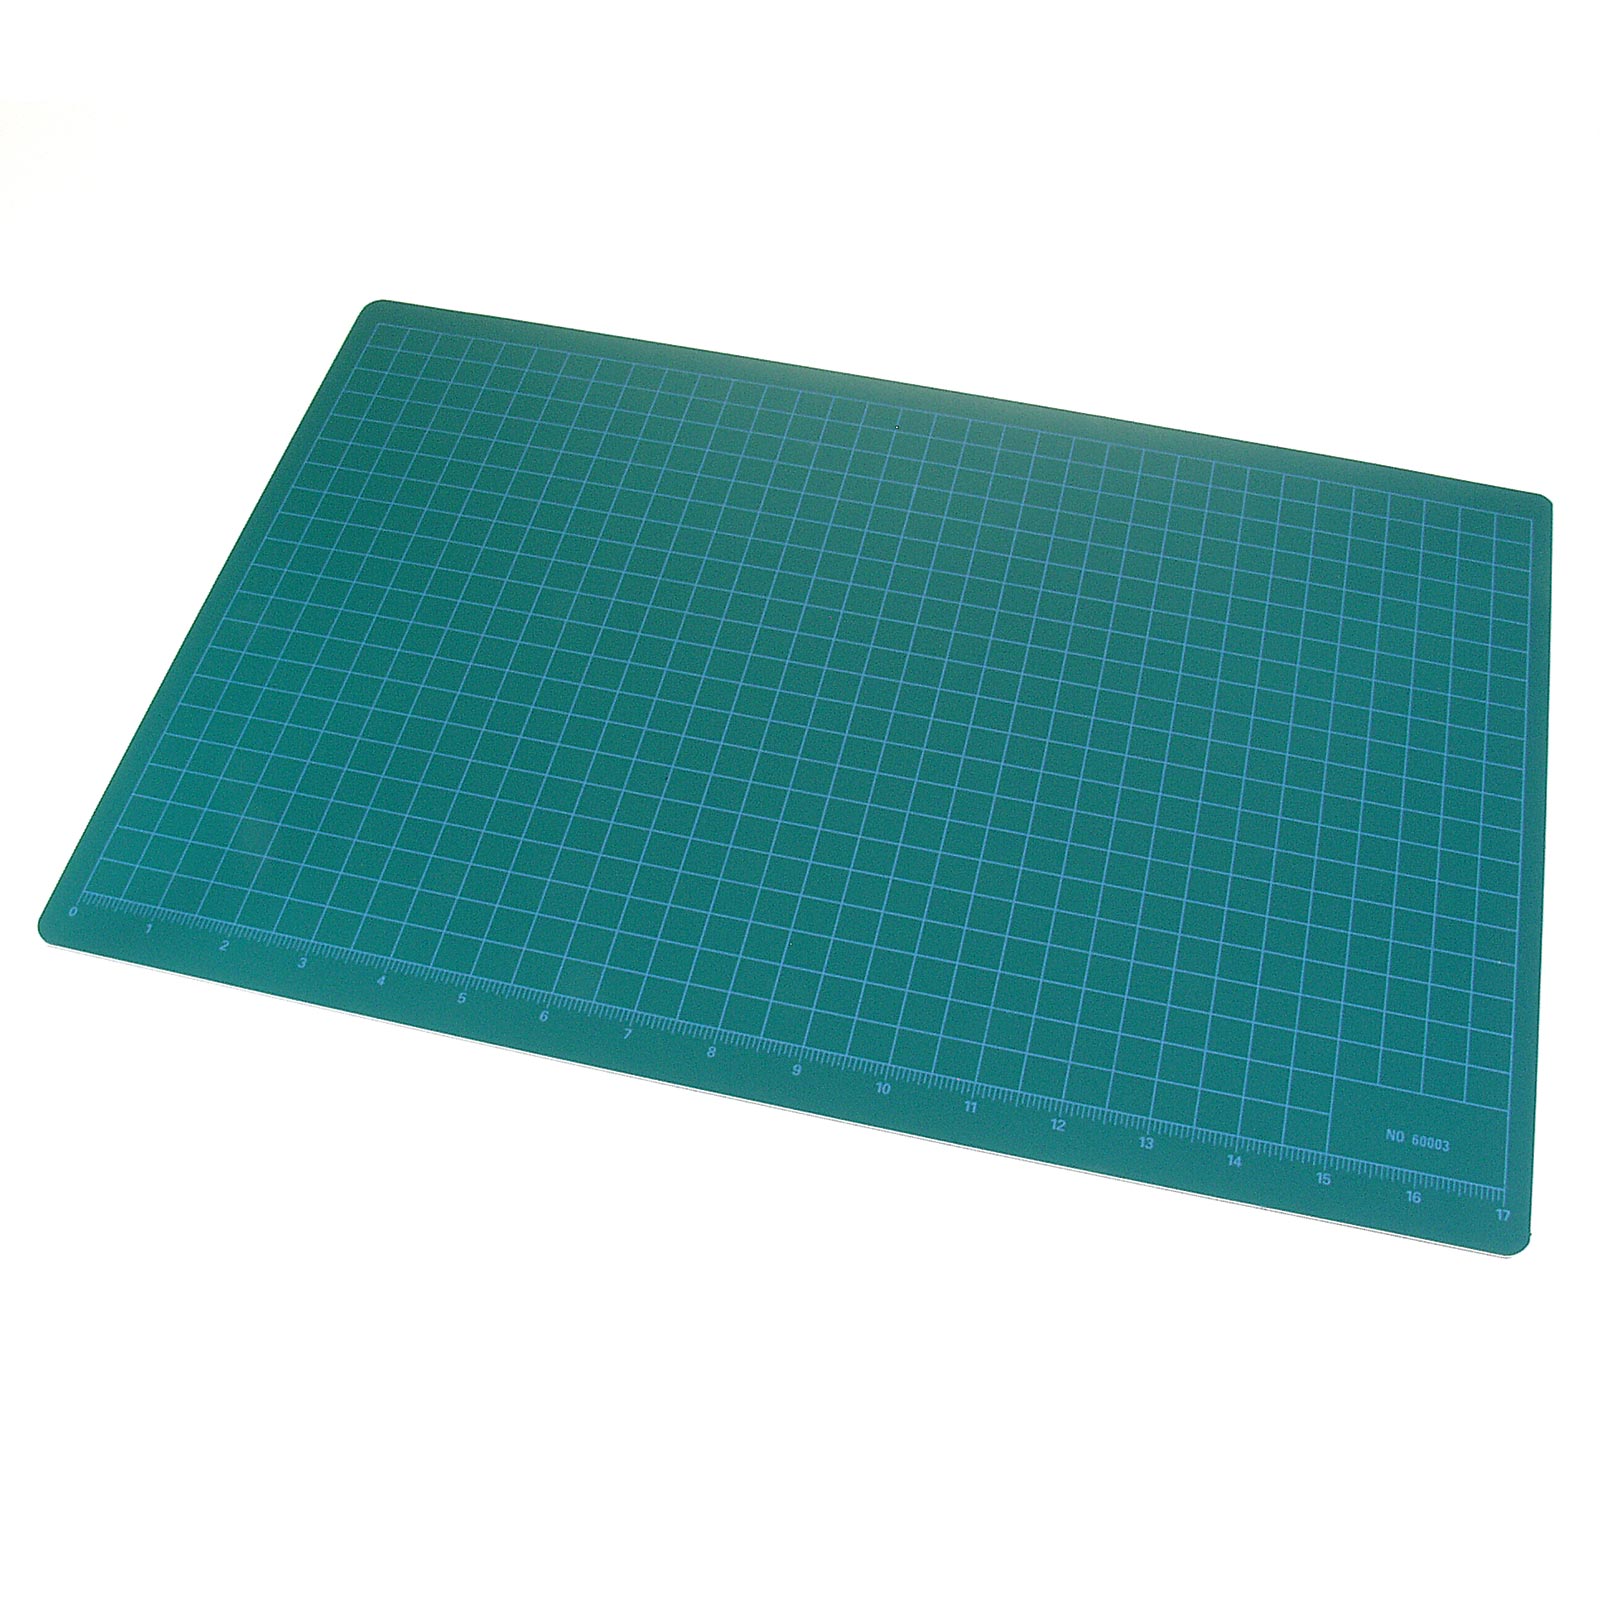 Cutting Pad, 12 Inches x 18 Inches